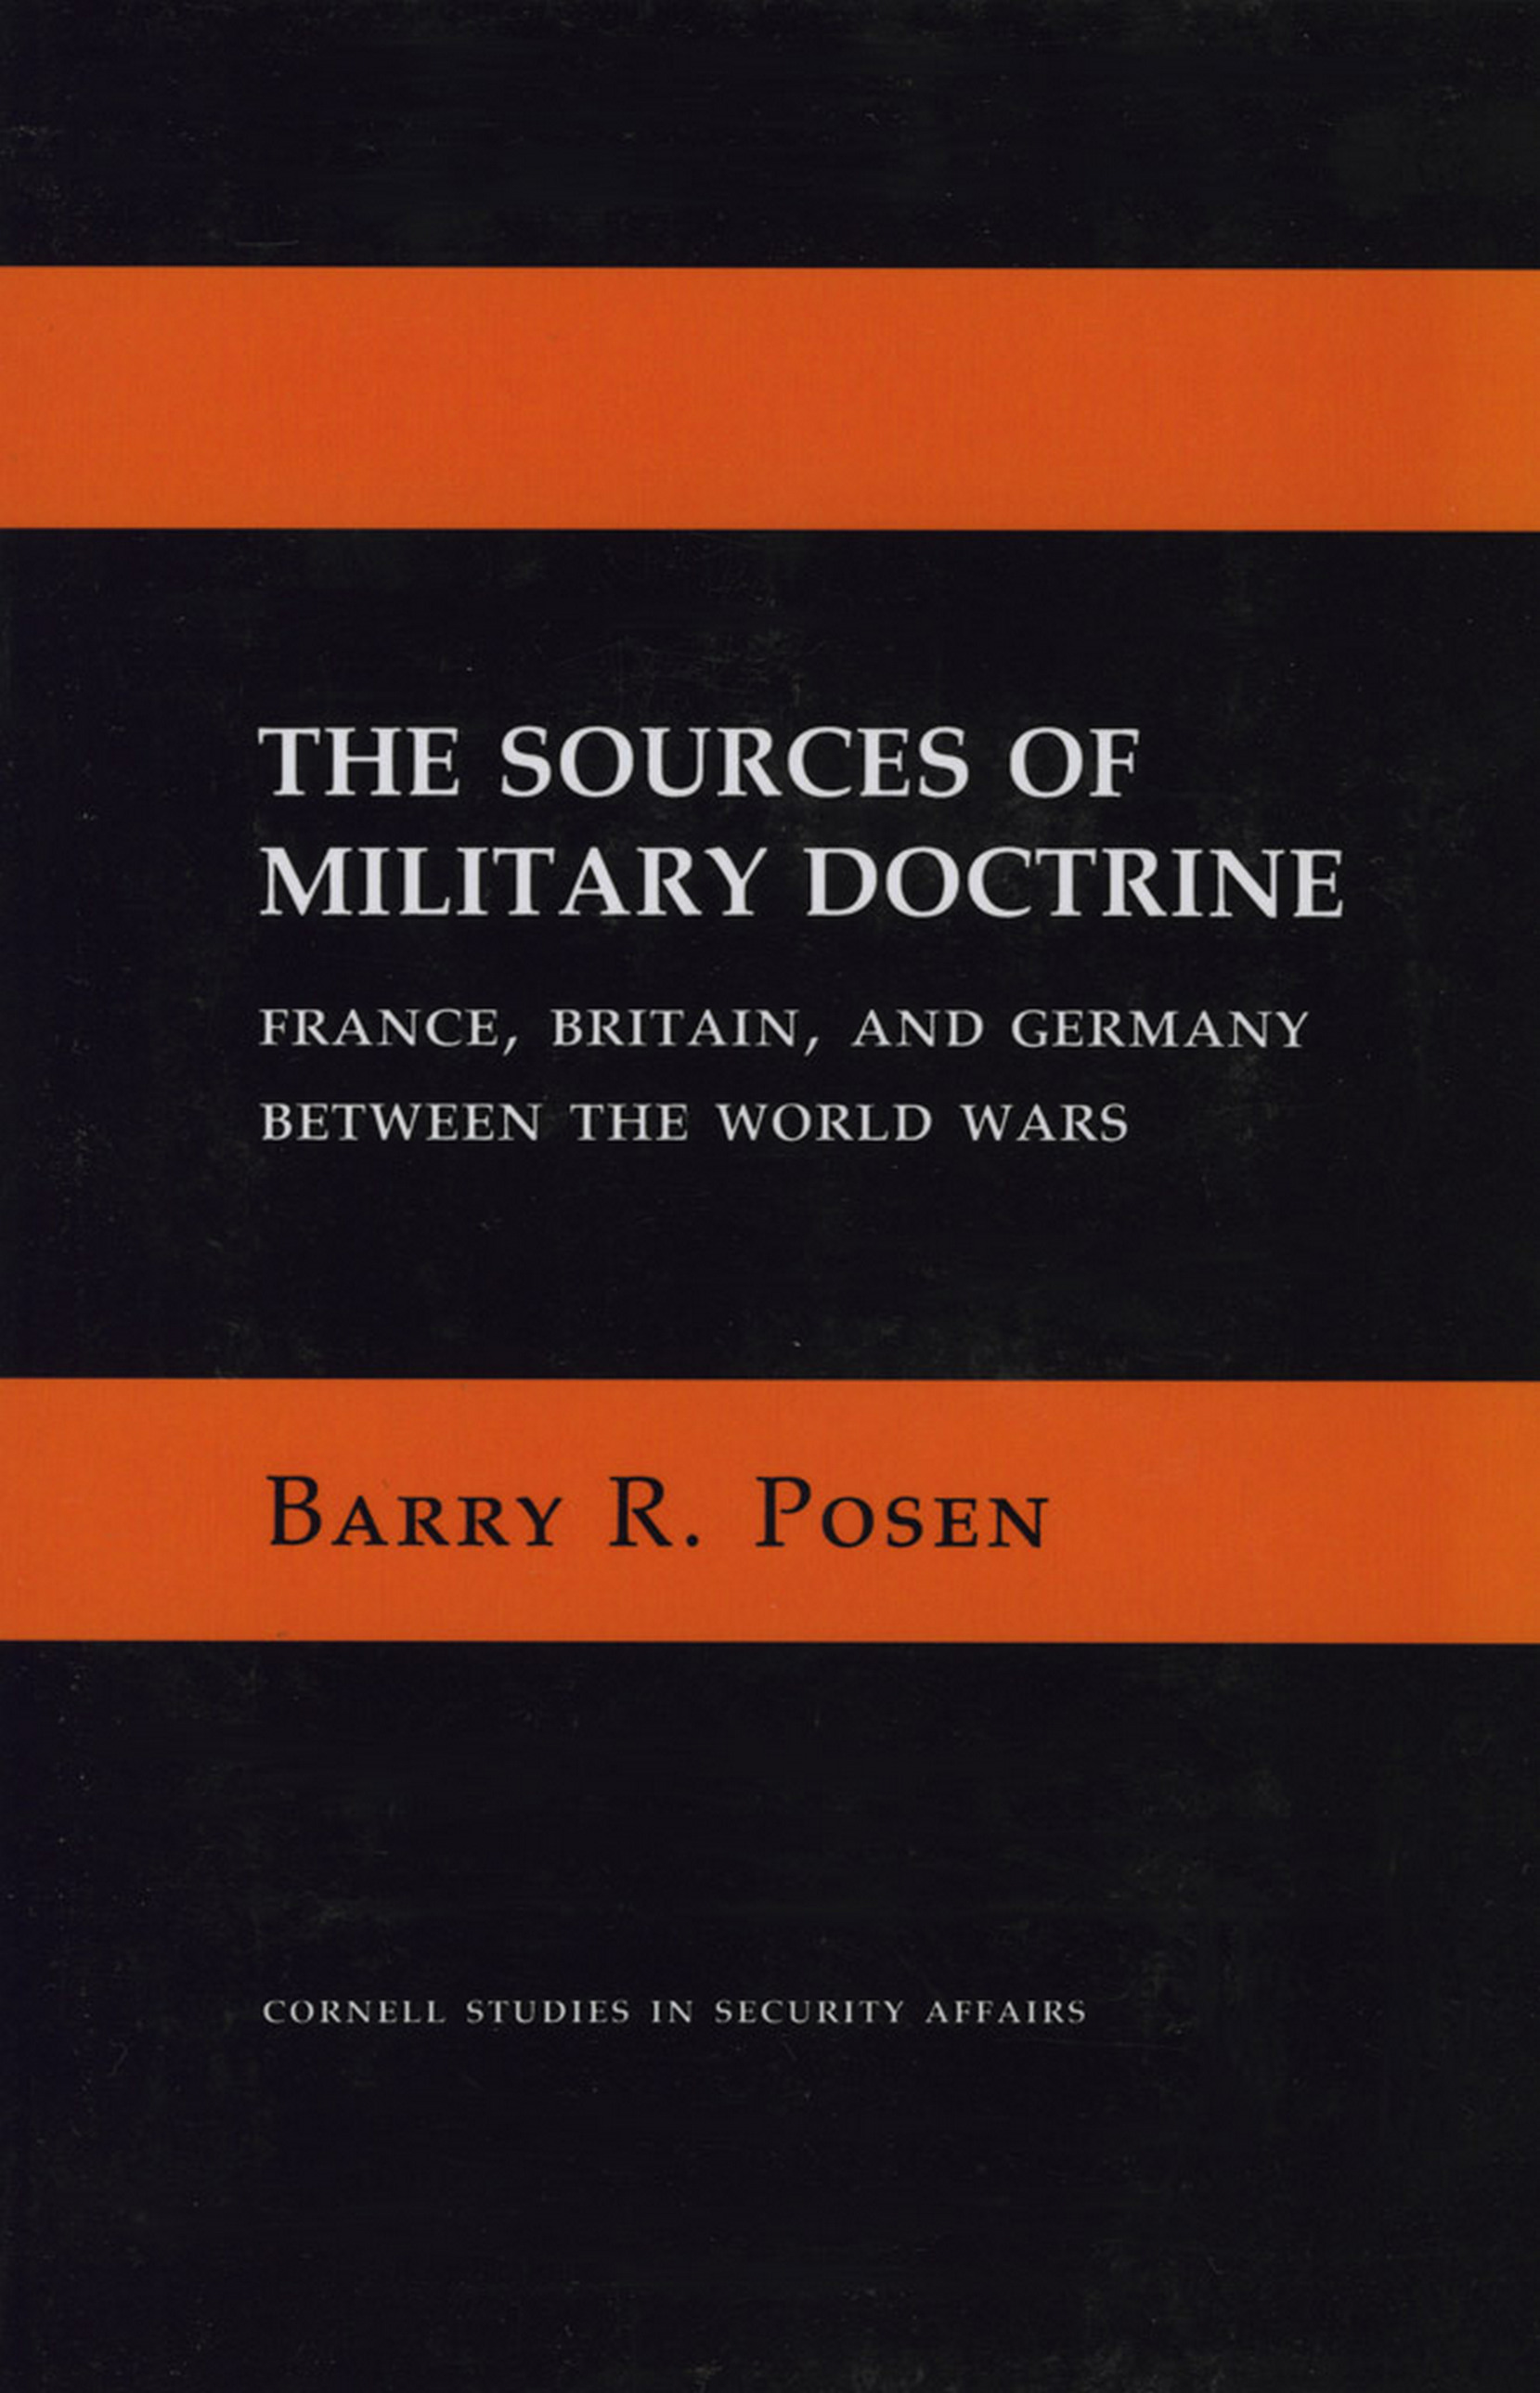 The Sources of Military Doctrine